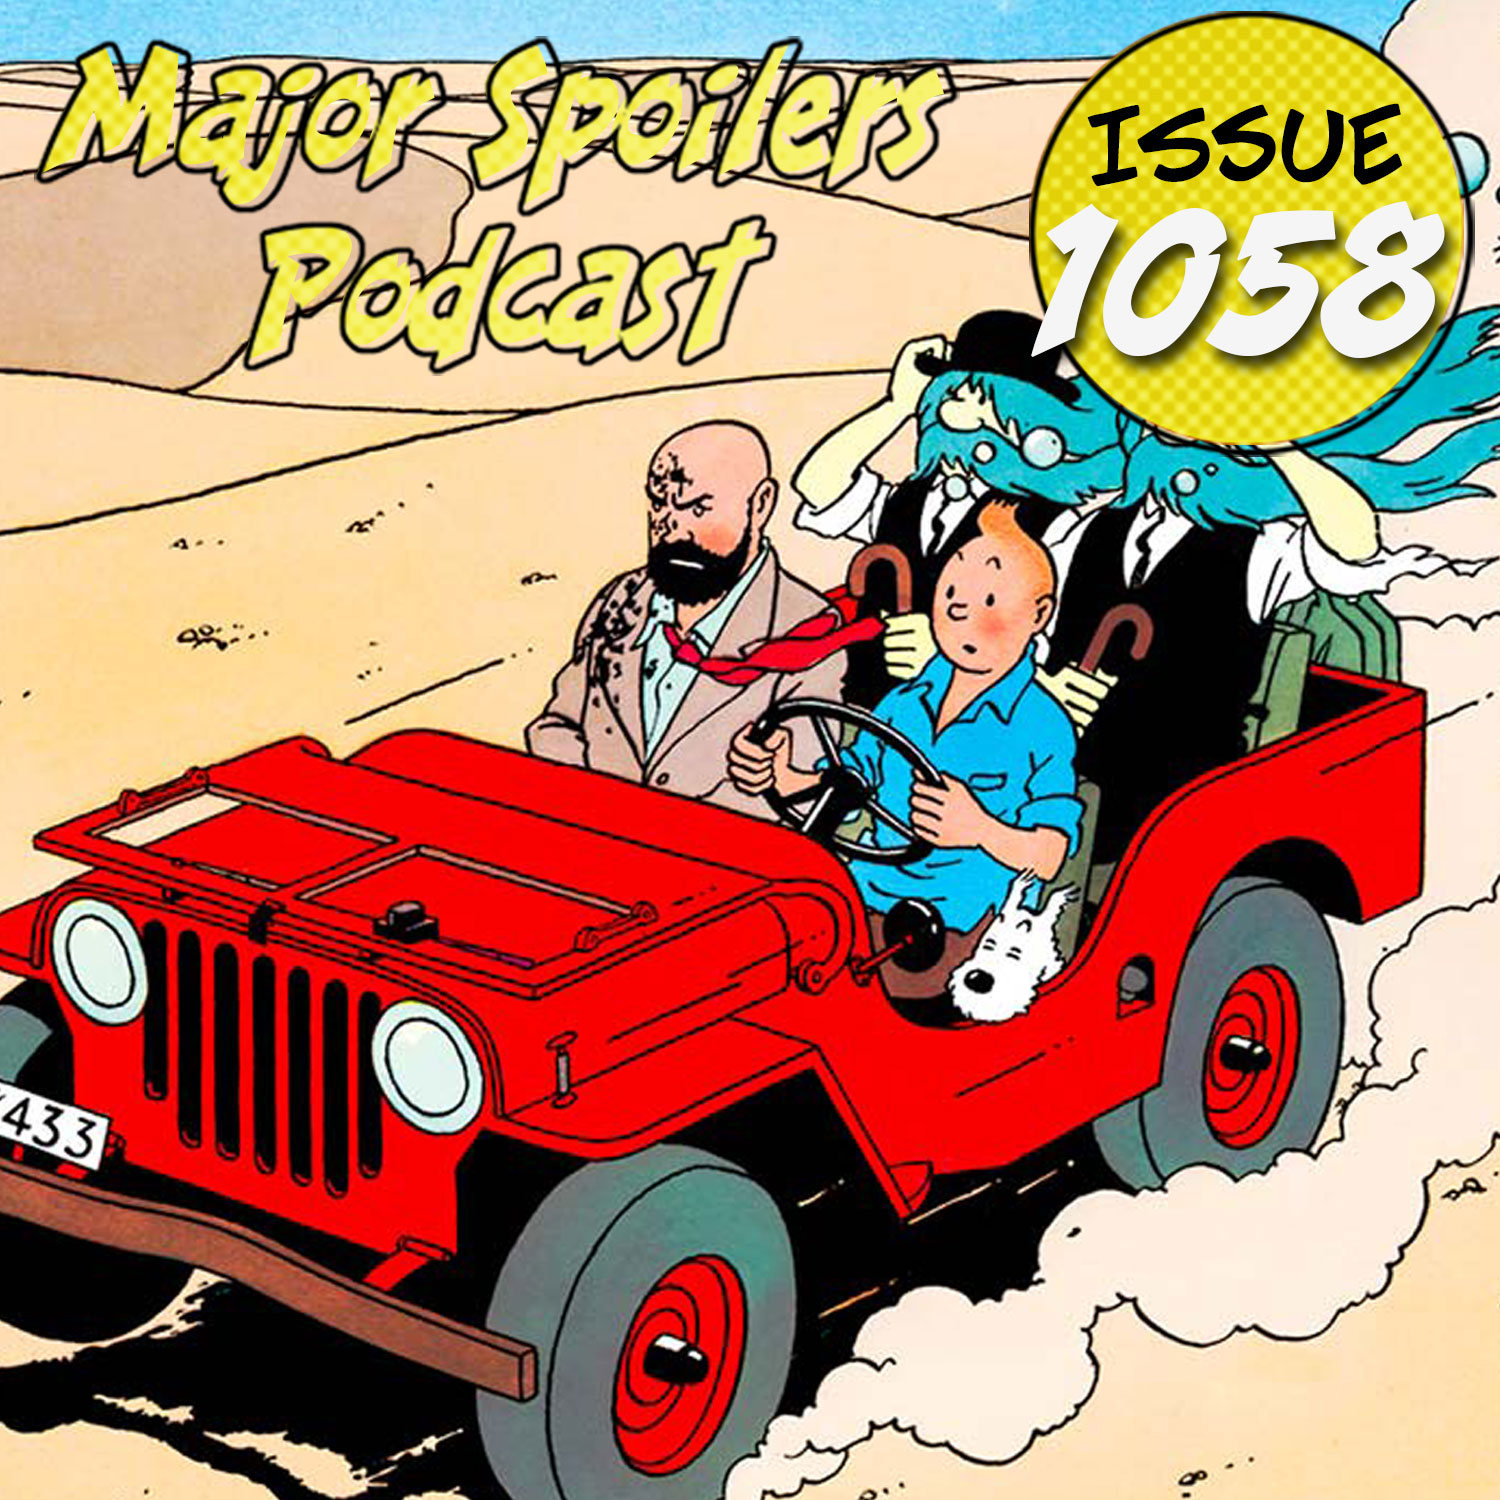 Major Spoilers Podcast #1058: It's Tintin Time Again